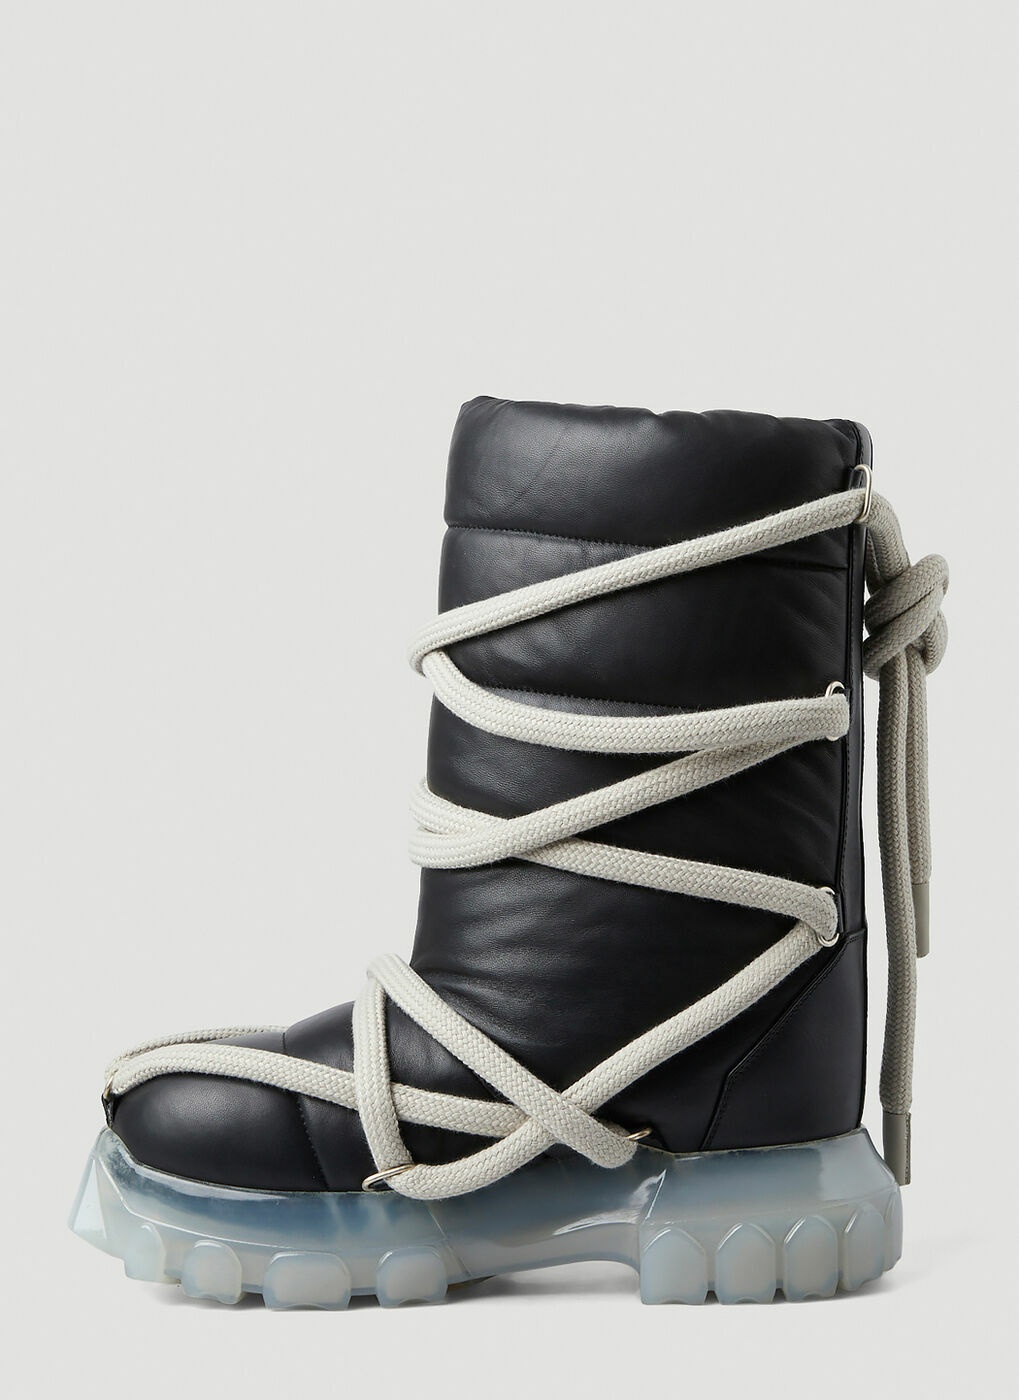 Rope Wrap Around Boots in Black Rick Owens